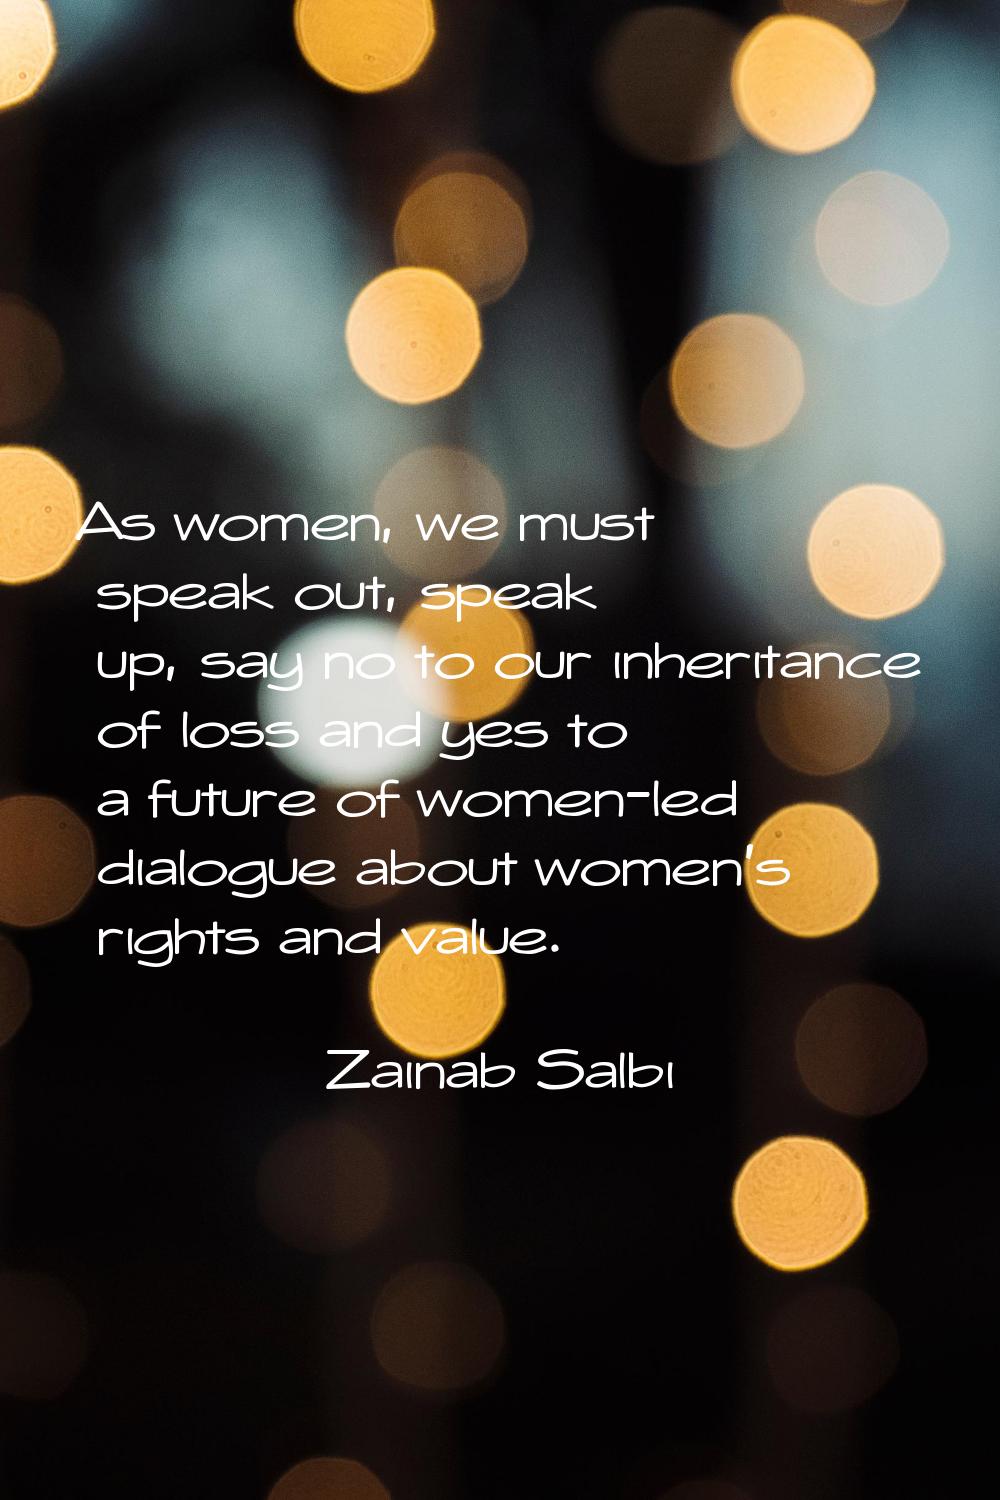 As women, we must speak out, speak up, say no to our inheritance of loss and yes to a future of wom